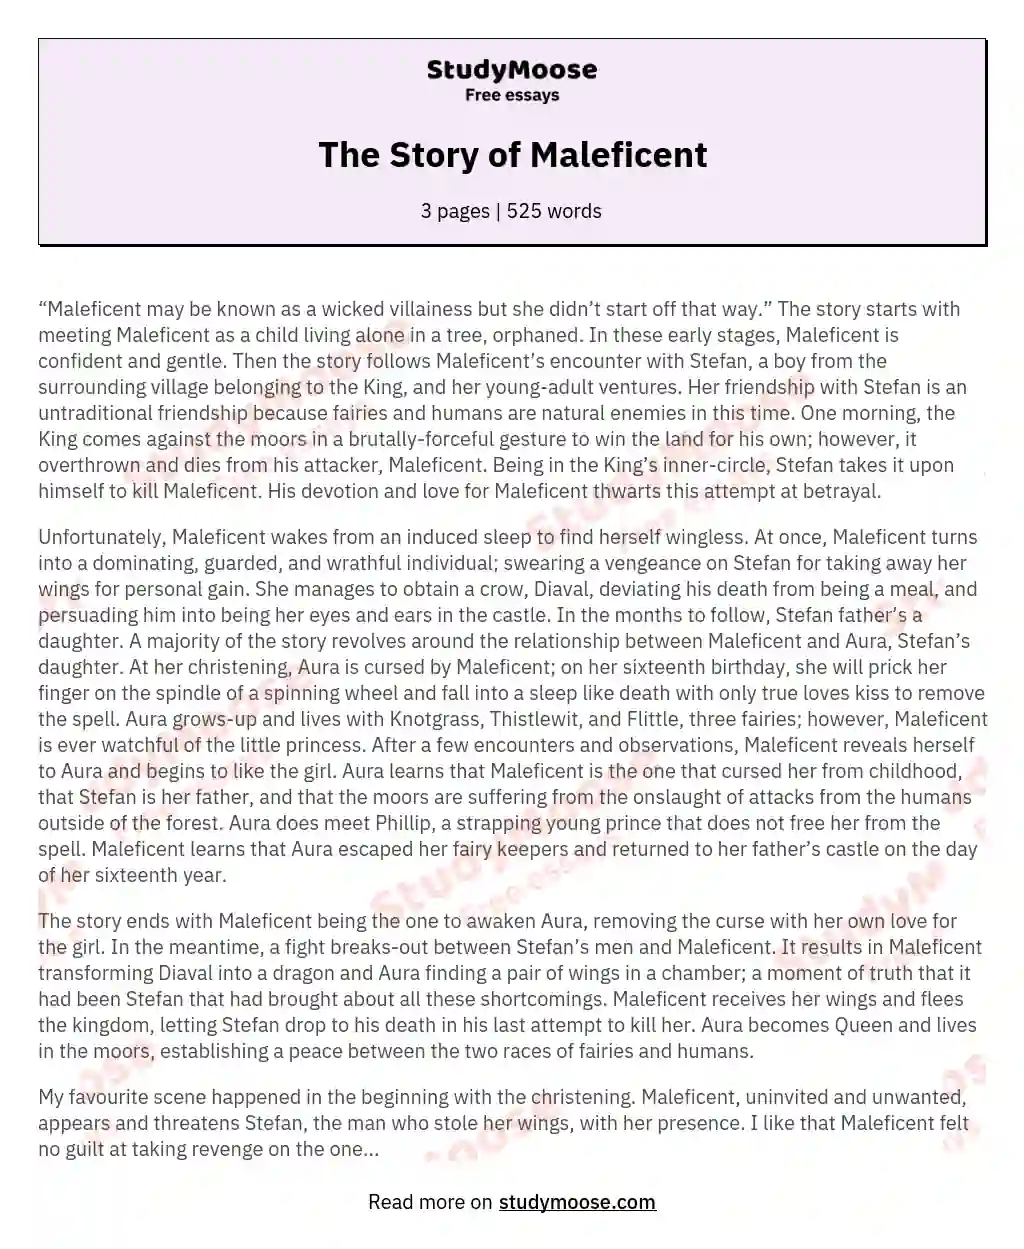 The Story of Maleficent essay